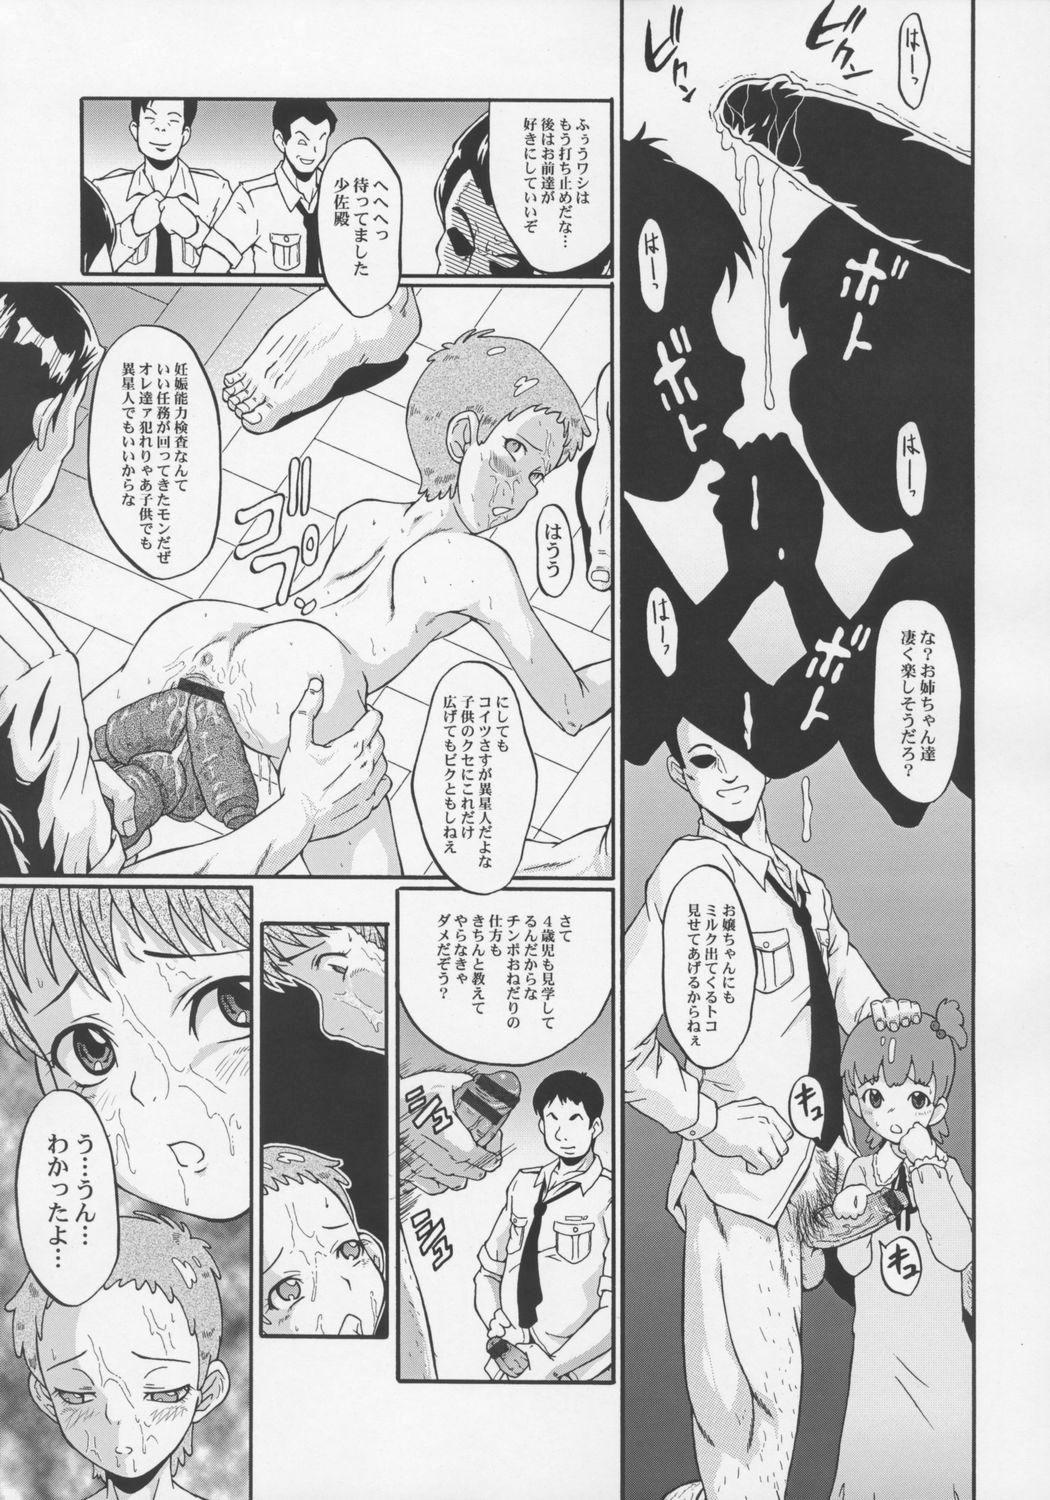 Oral Sex Urabambi Vol. 33 - Hello, I Love You Don't Tell Me Your Name - Galactic drifter vifam Putinha - Page 10